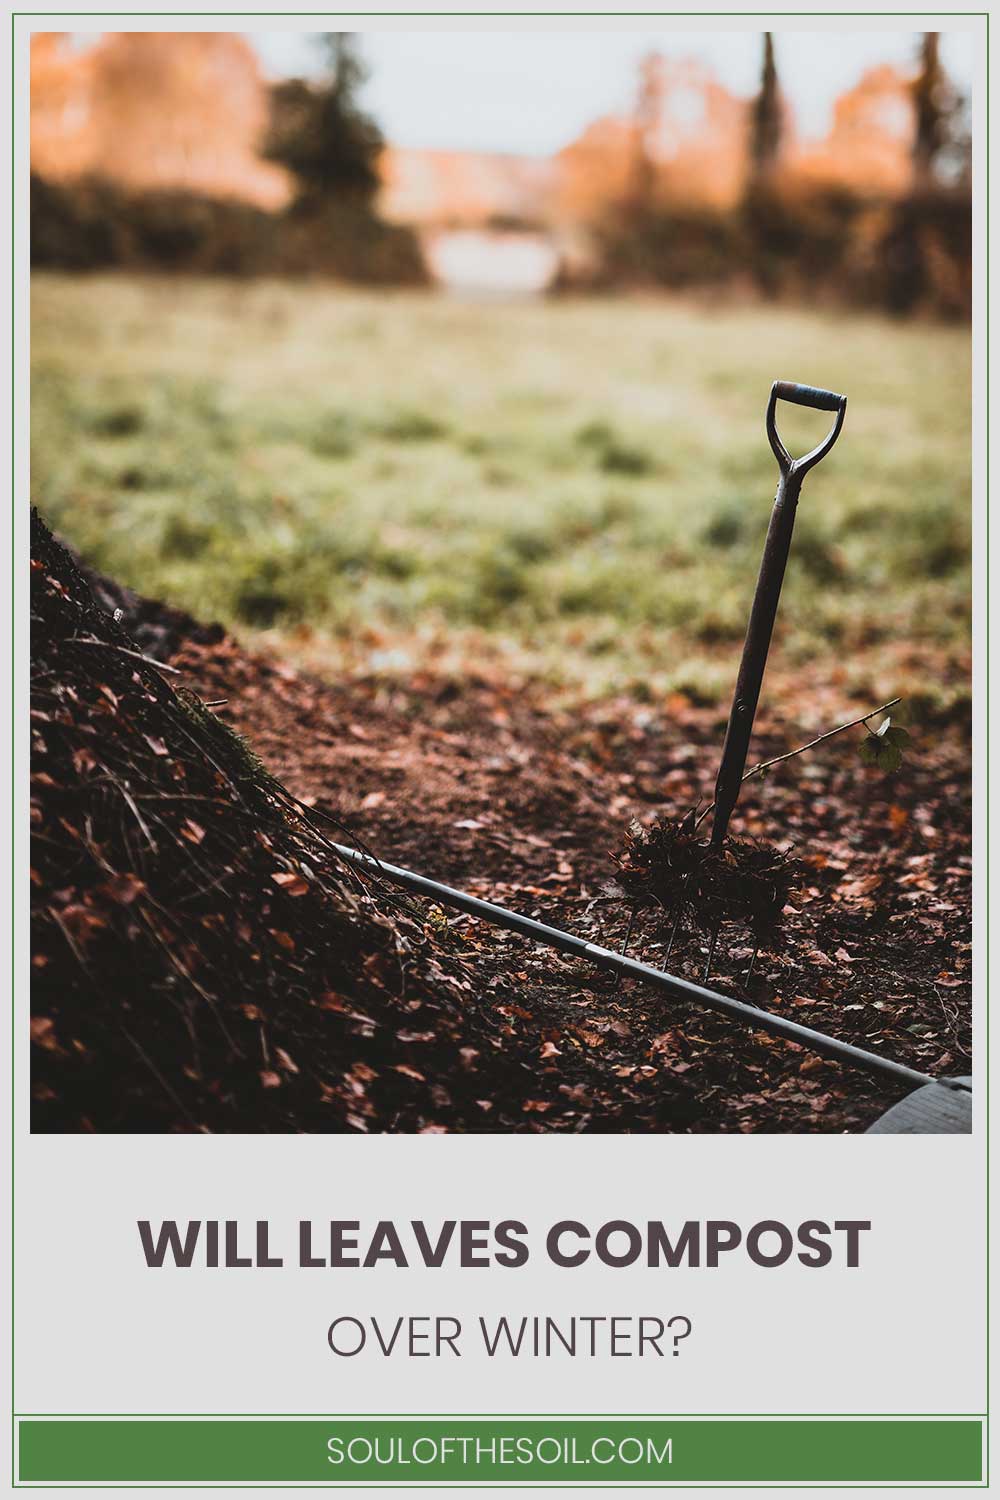 A shovel near a pile of dead leaves - will they compost over winter?